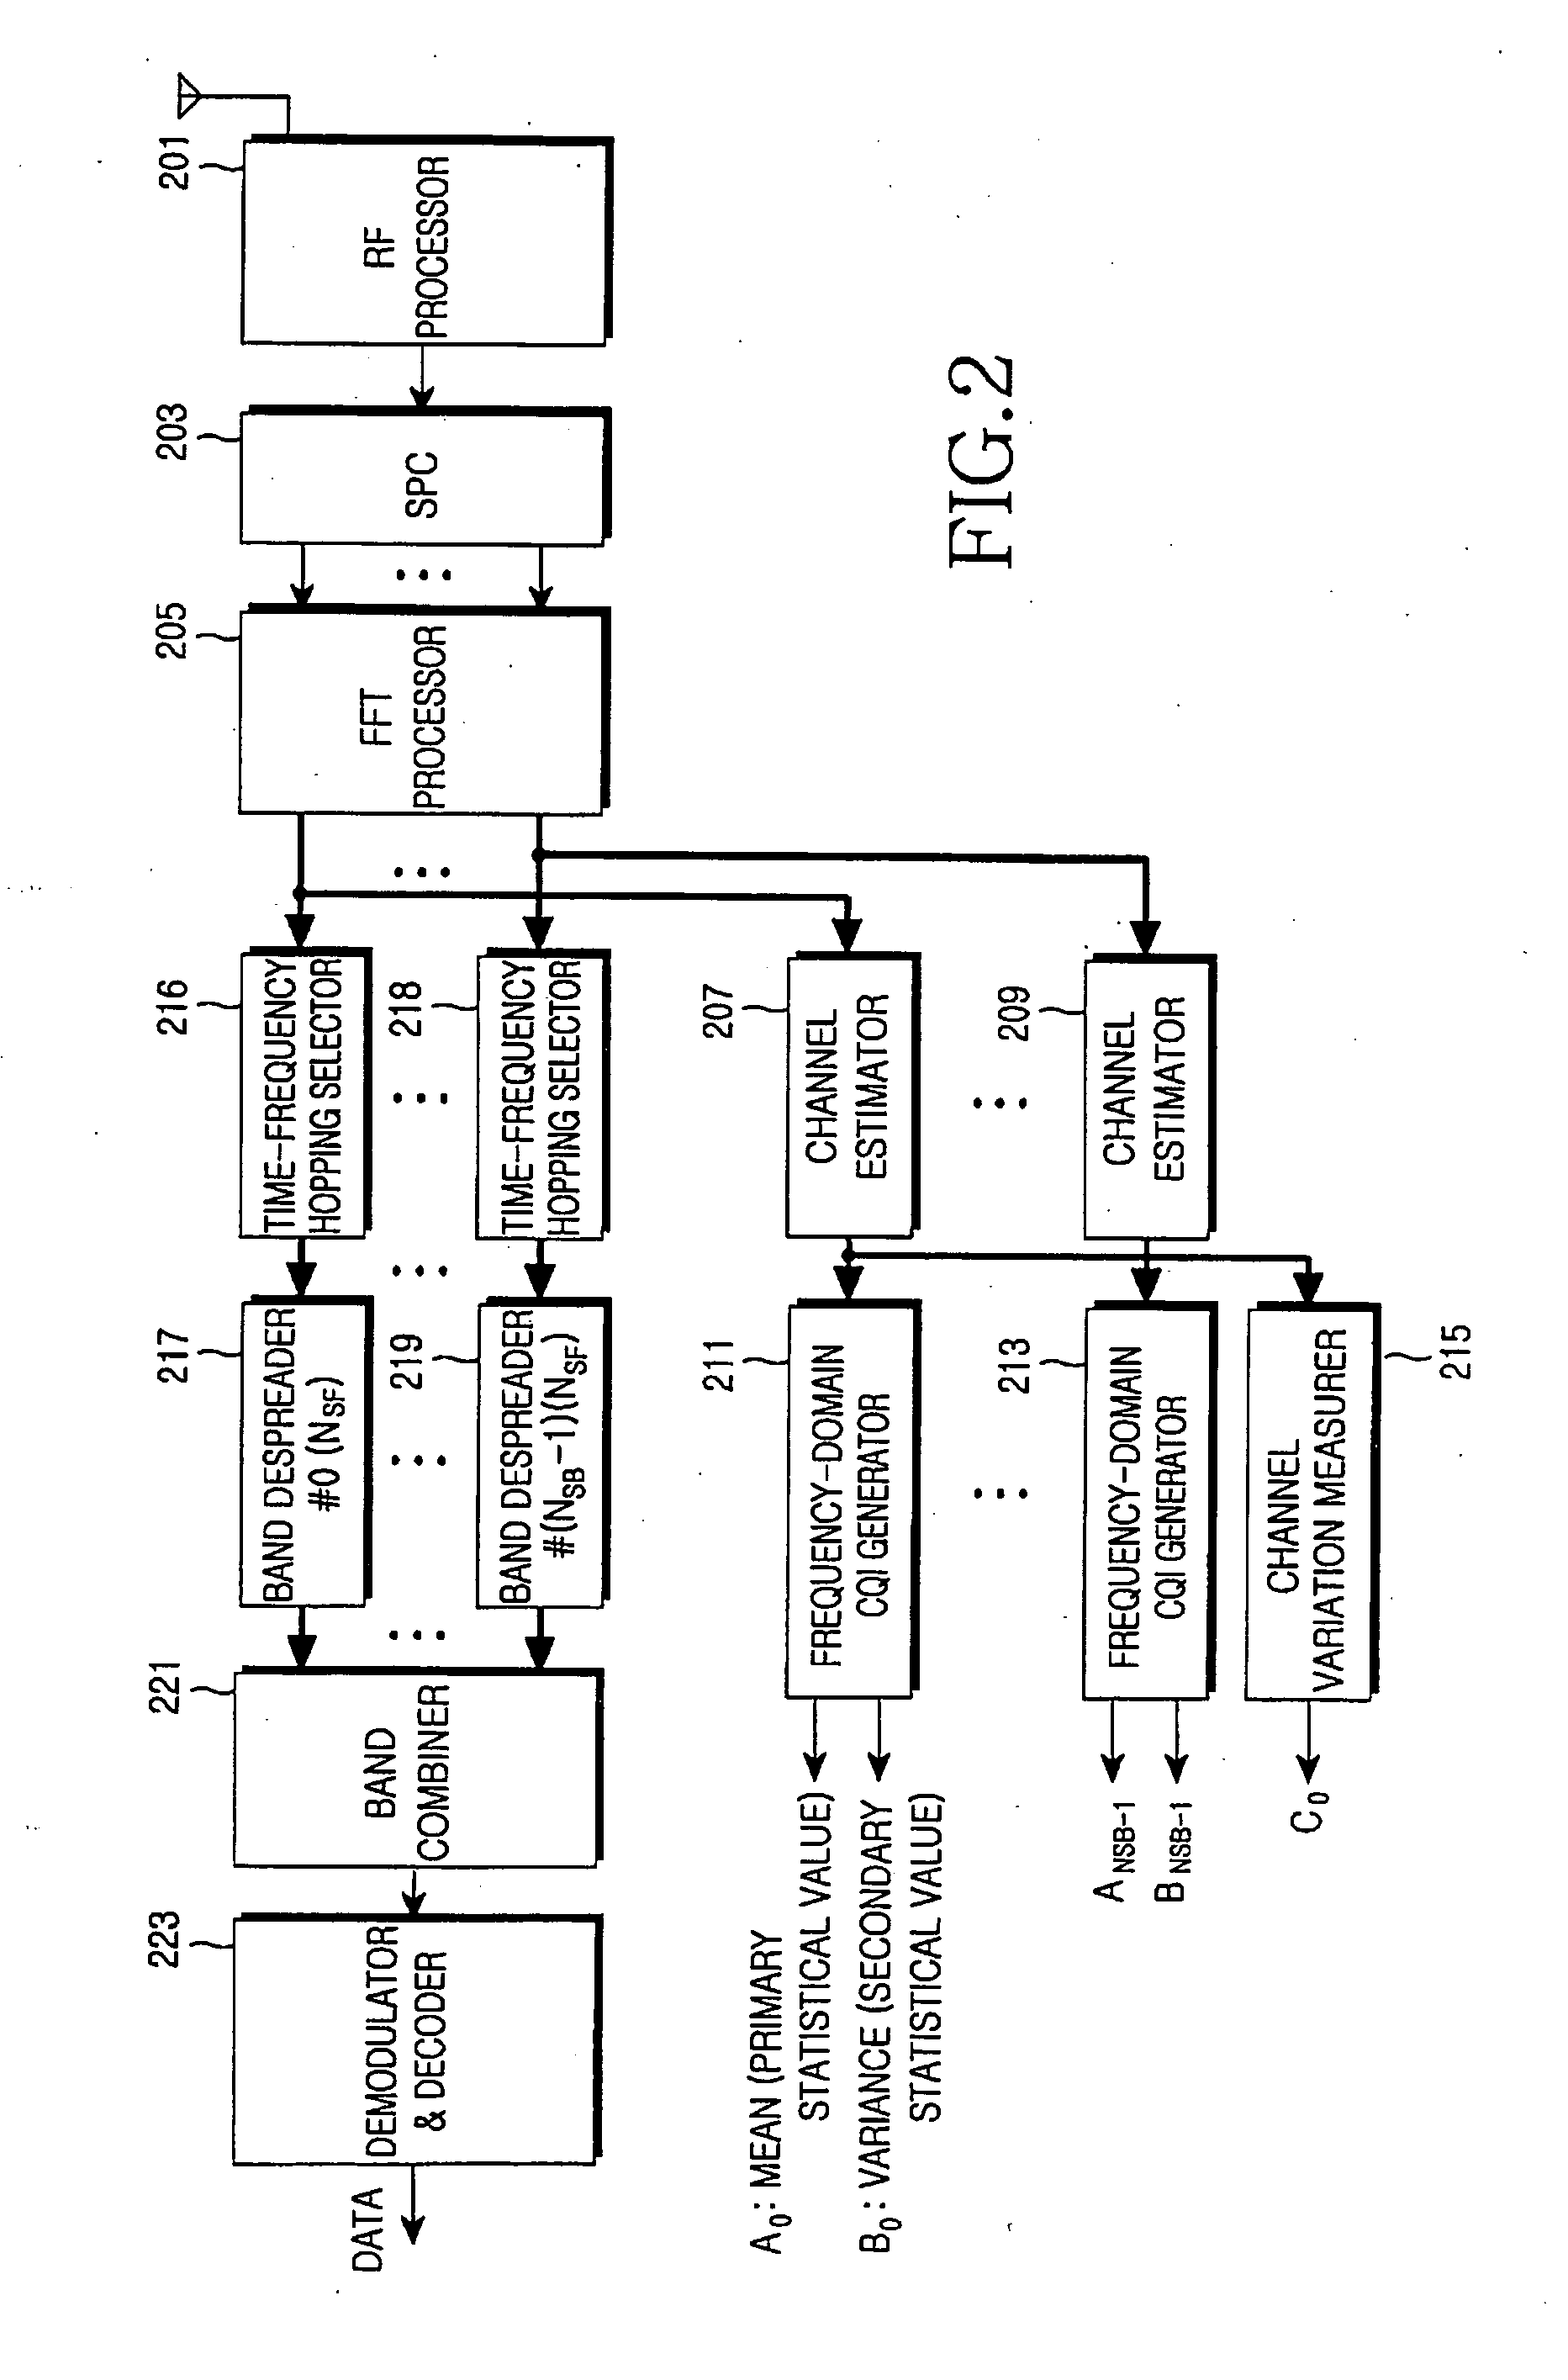 Apparatus and method for switching between an AMC mode and a diversity mode in a broadband wireless communication system